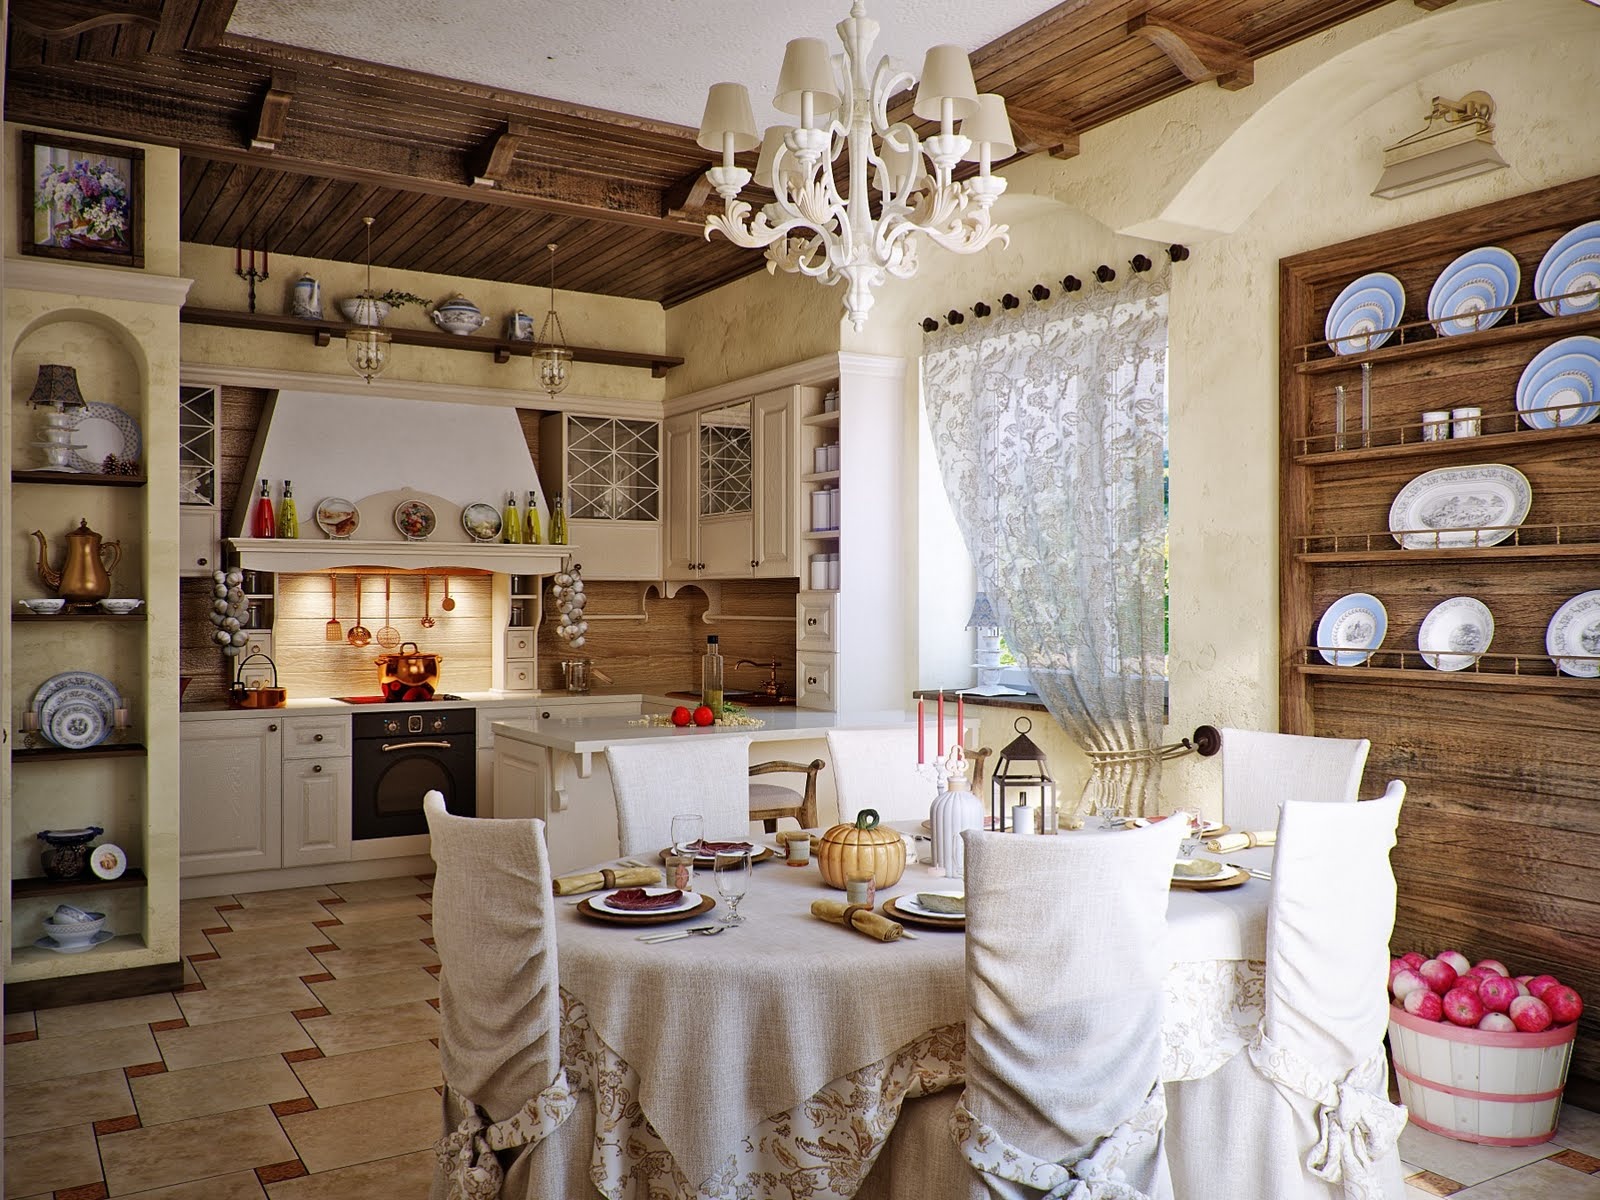 Interior of spanish style kitchen design with dinning table set